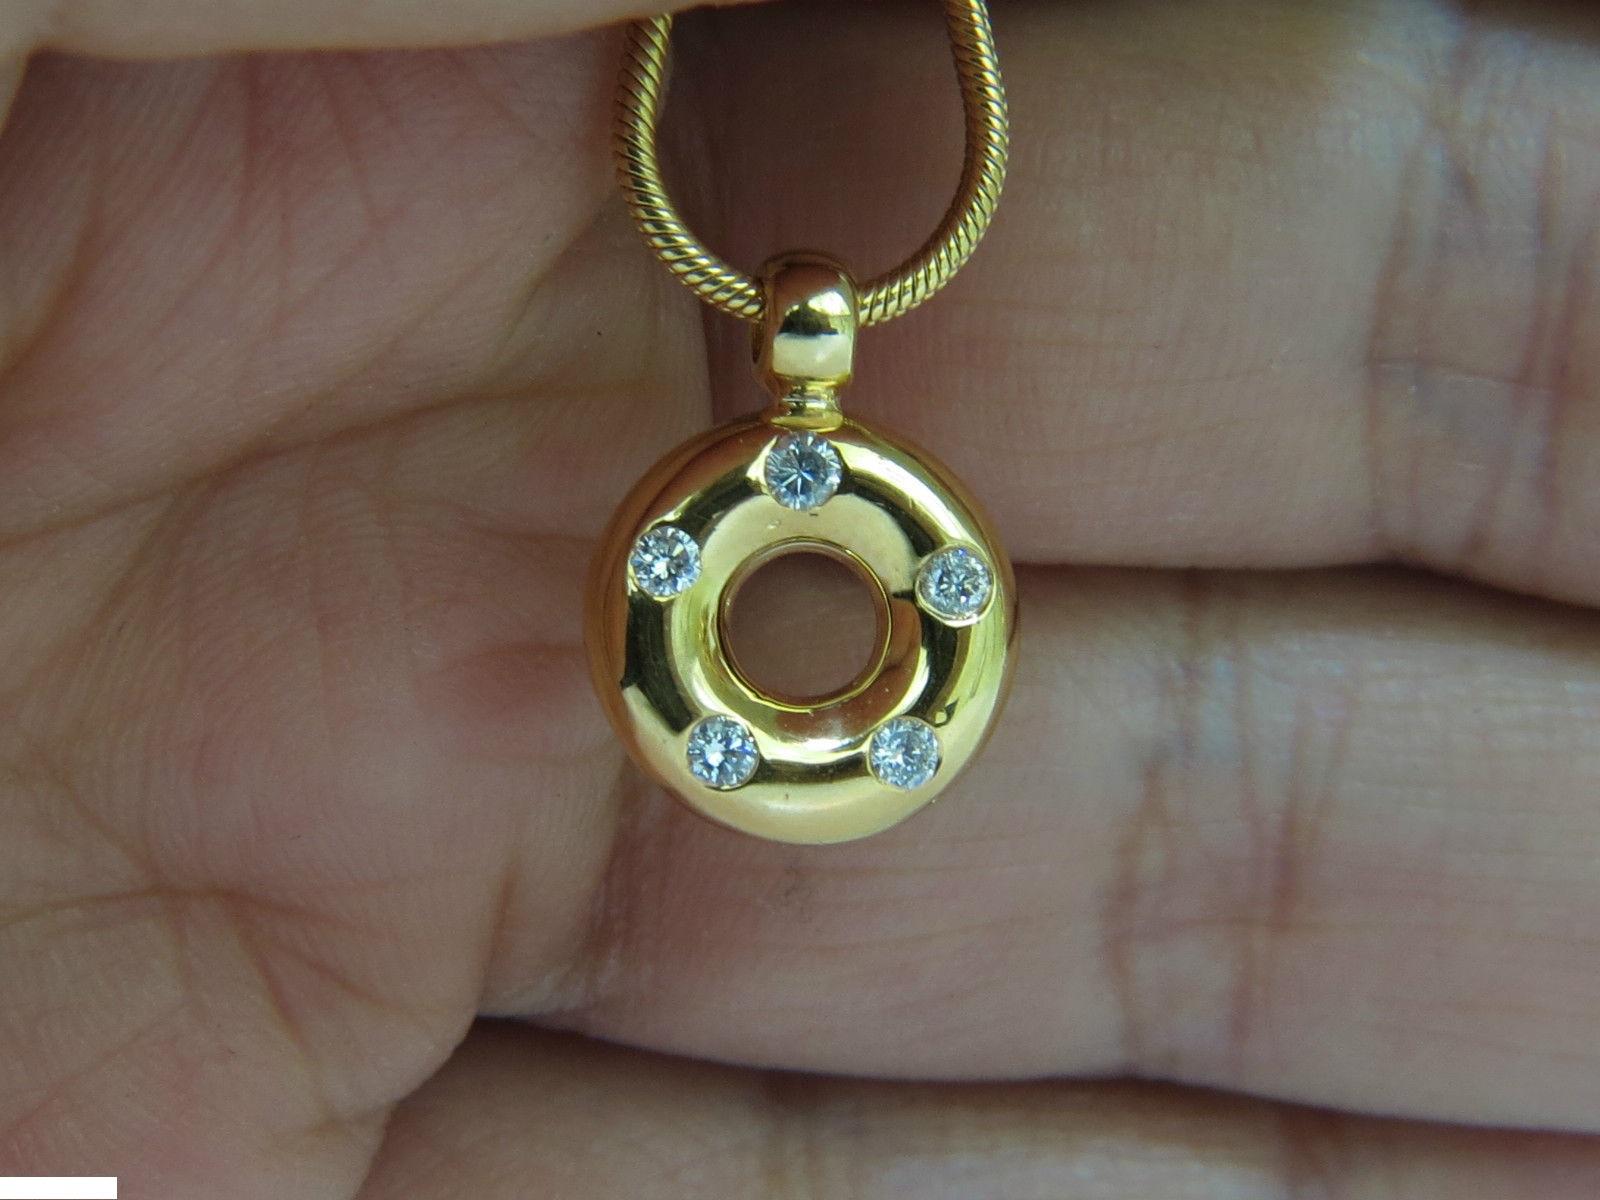  .25ct. (5) Diamonds circle pendant:

All diamonds: full cut & rounds

H color, Vs-2 clarity.

14kt. & 14kt 16.5 inch necklace included

9.1 grams

Diameter: 13mm

please see all photos 

$2100 Appraisal will accompany